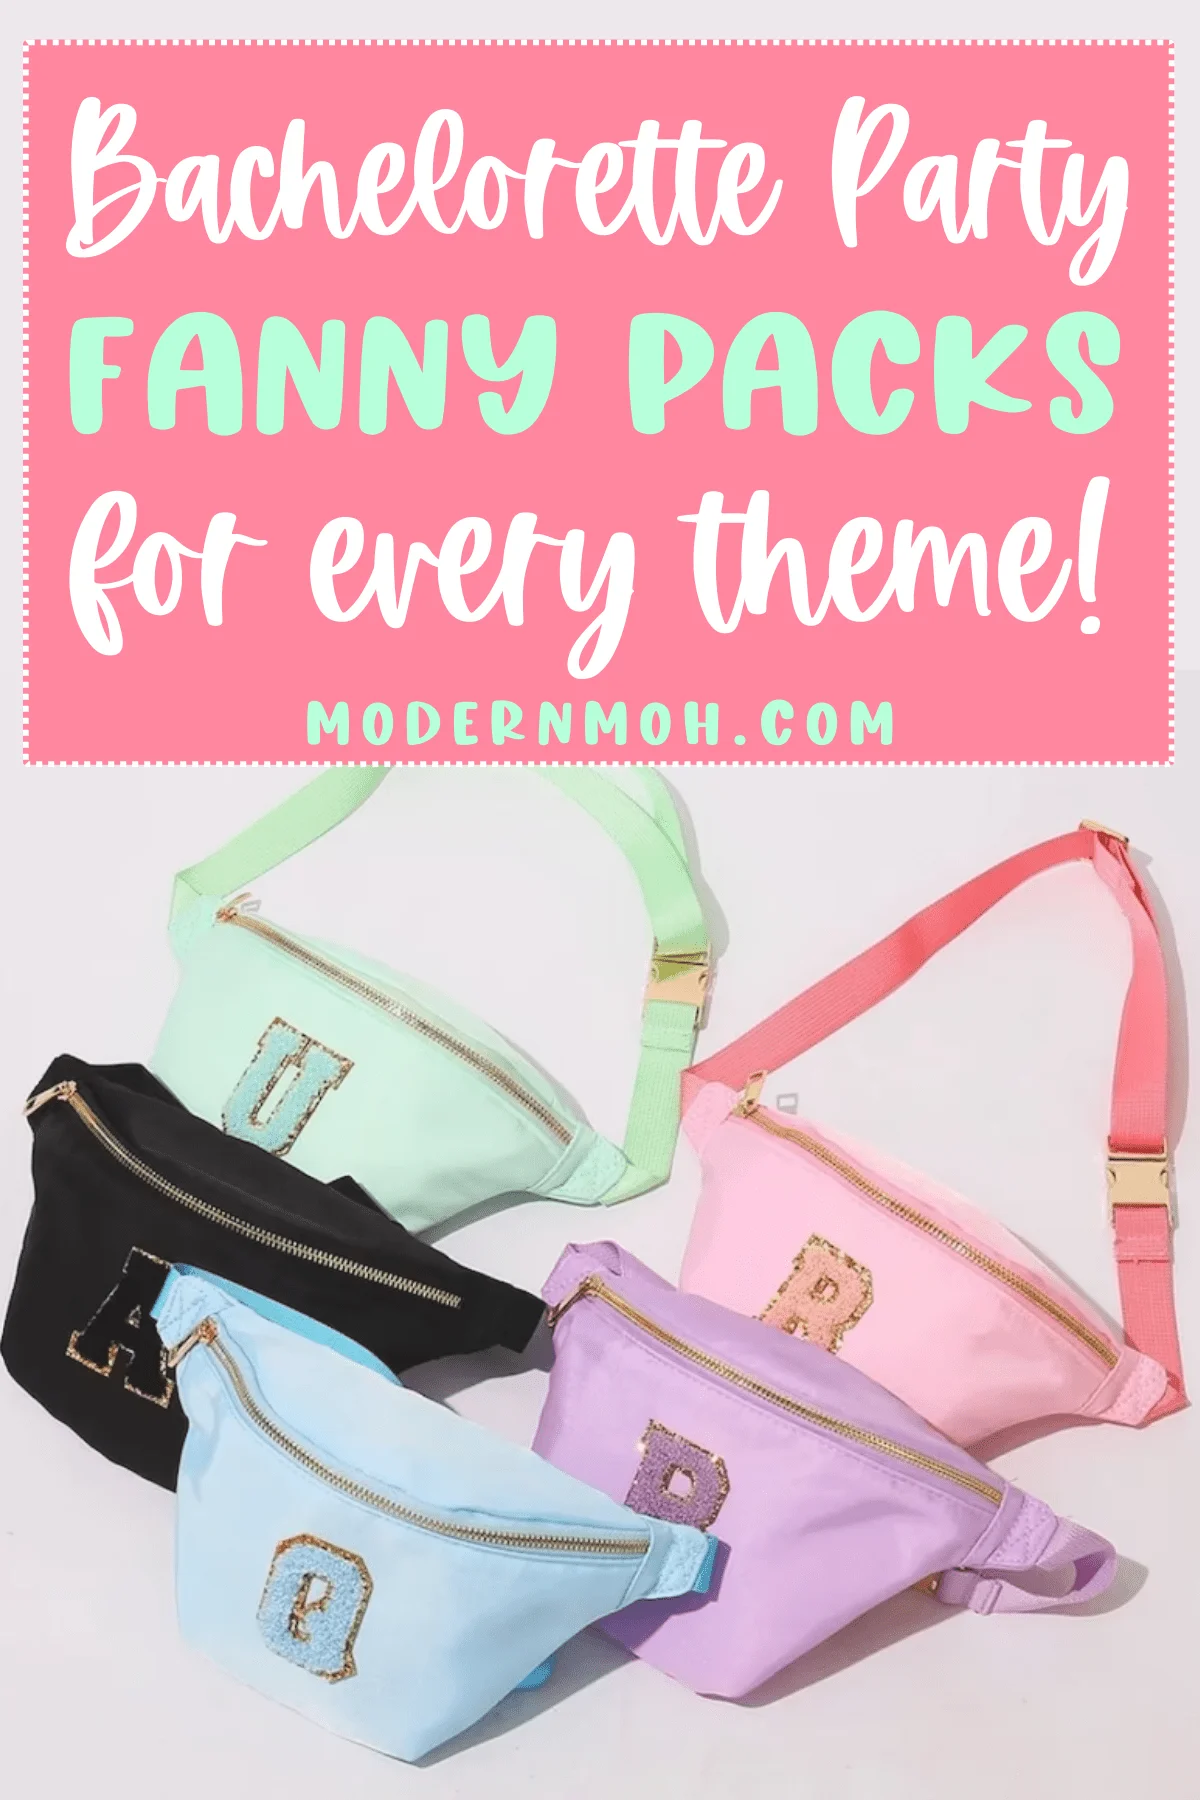 10 Bachelorette Party Fanny Packs for You and Your Crew